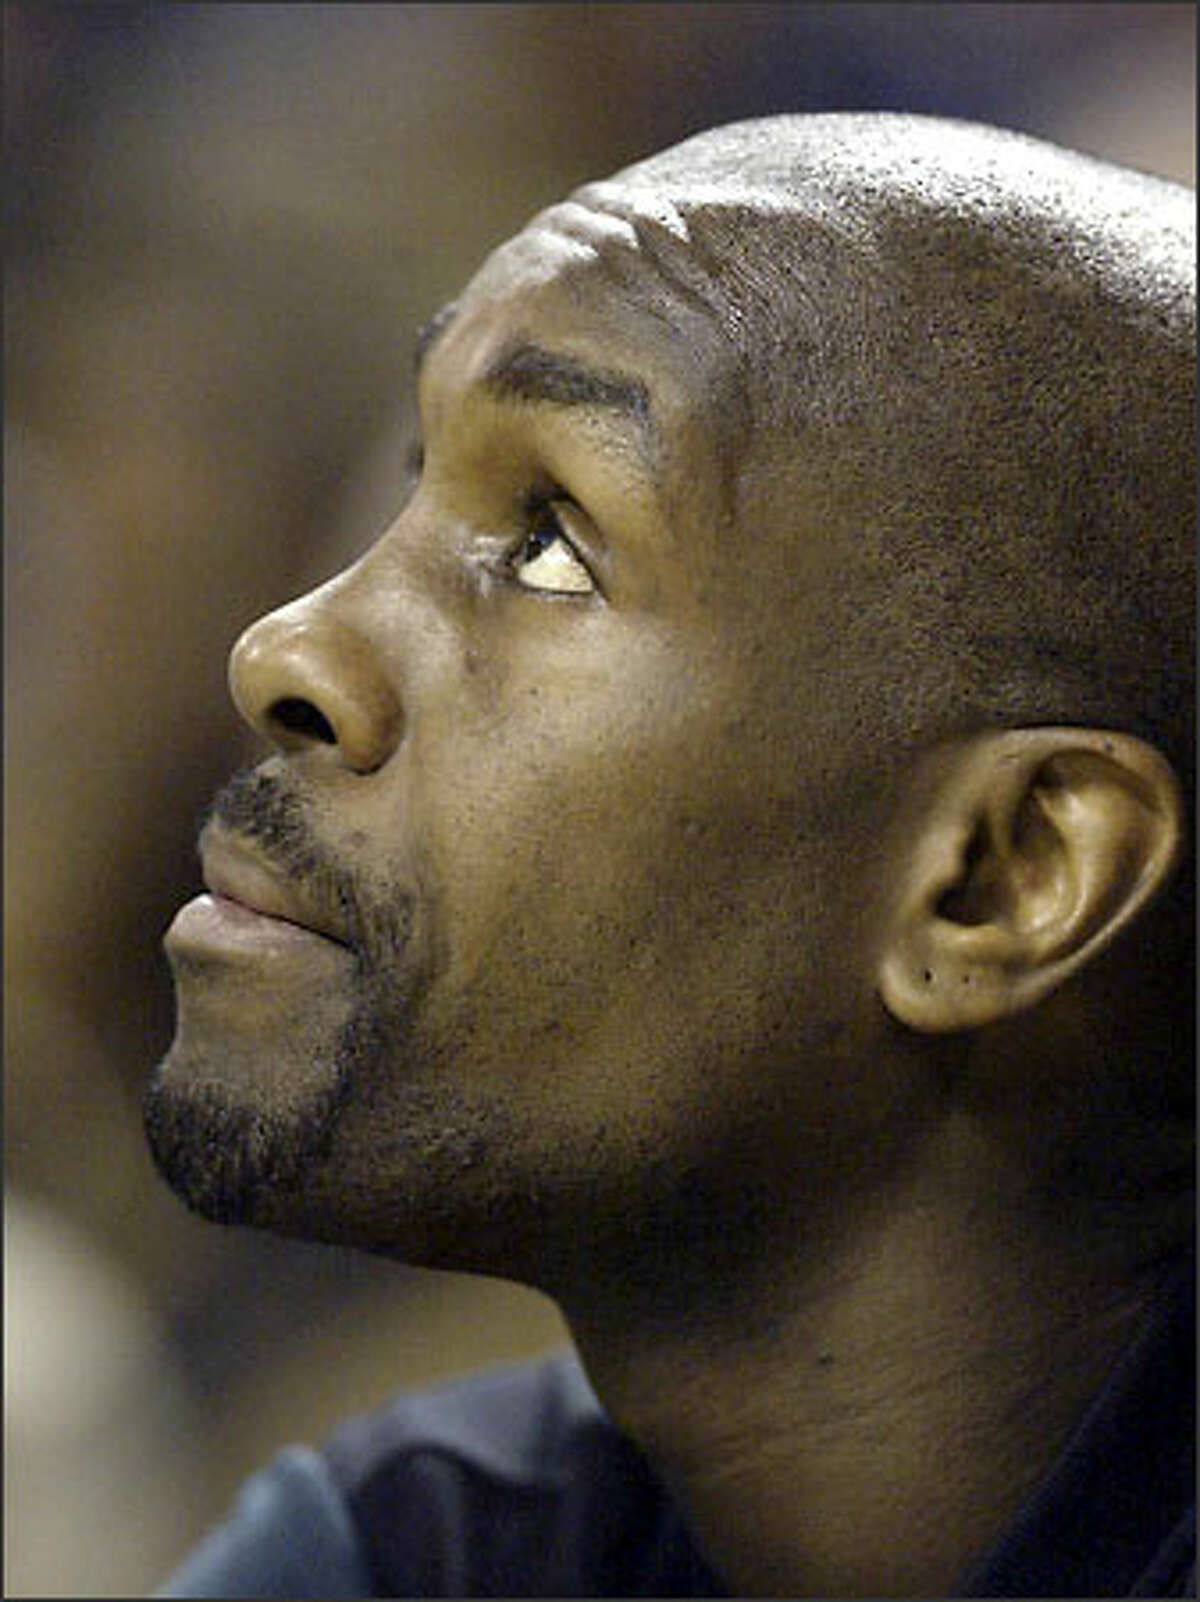 Gary Payton played a game-high 43 minutes, hitting 9 of his 17 shots.